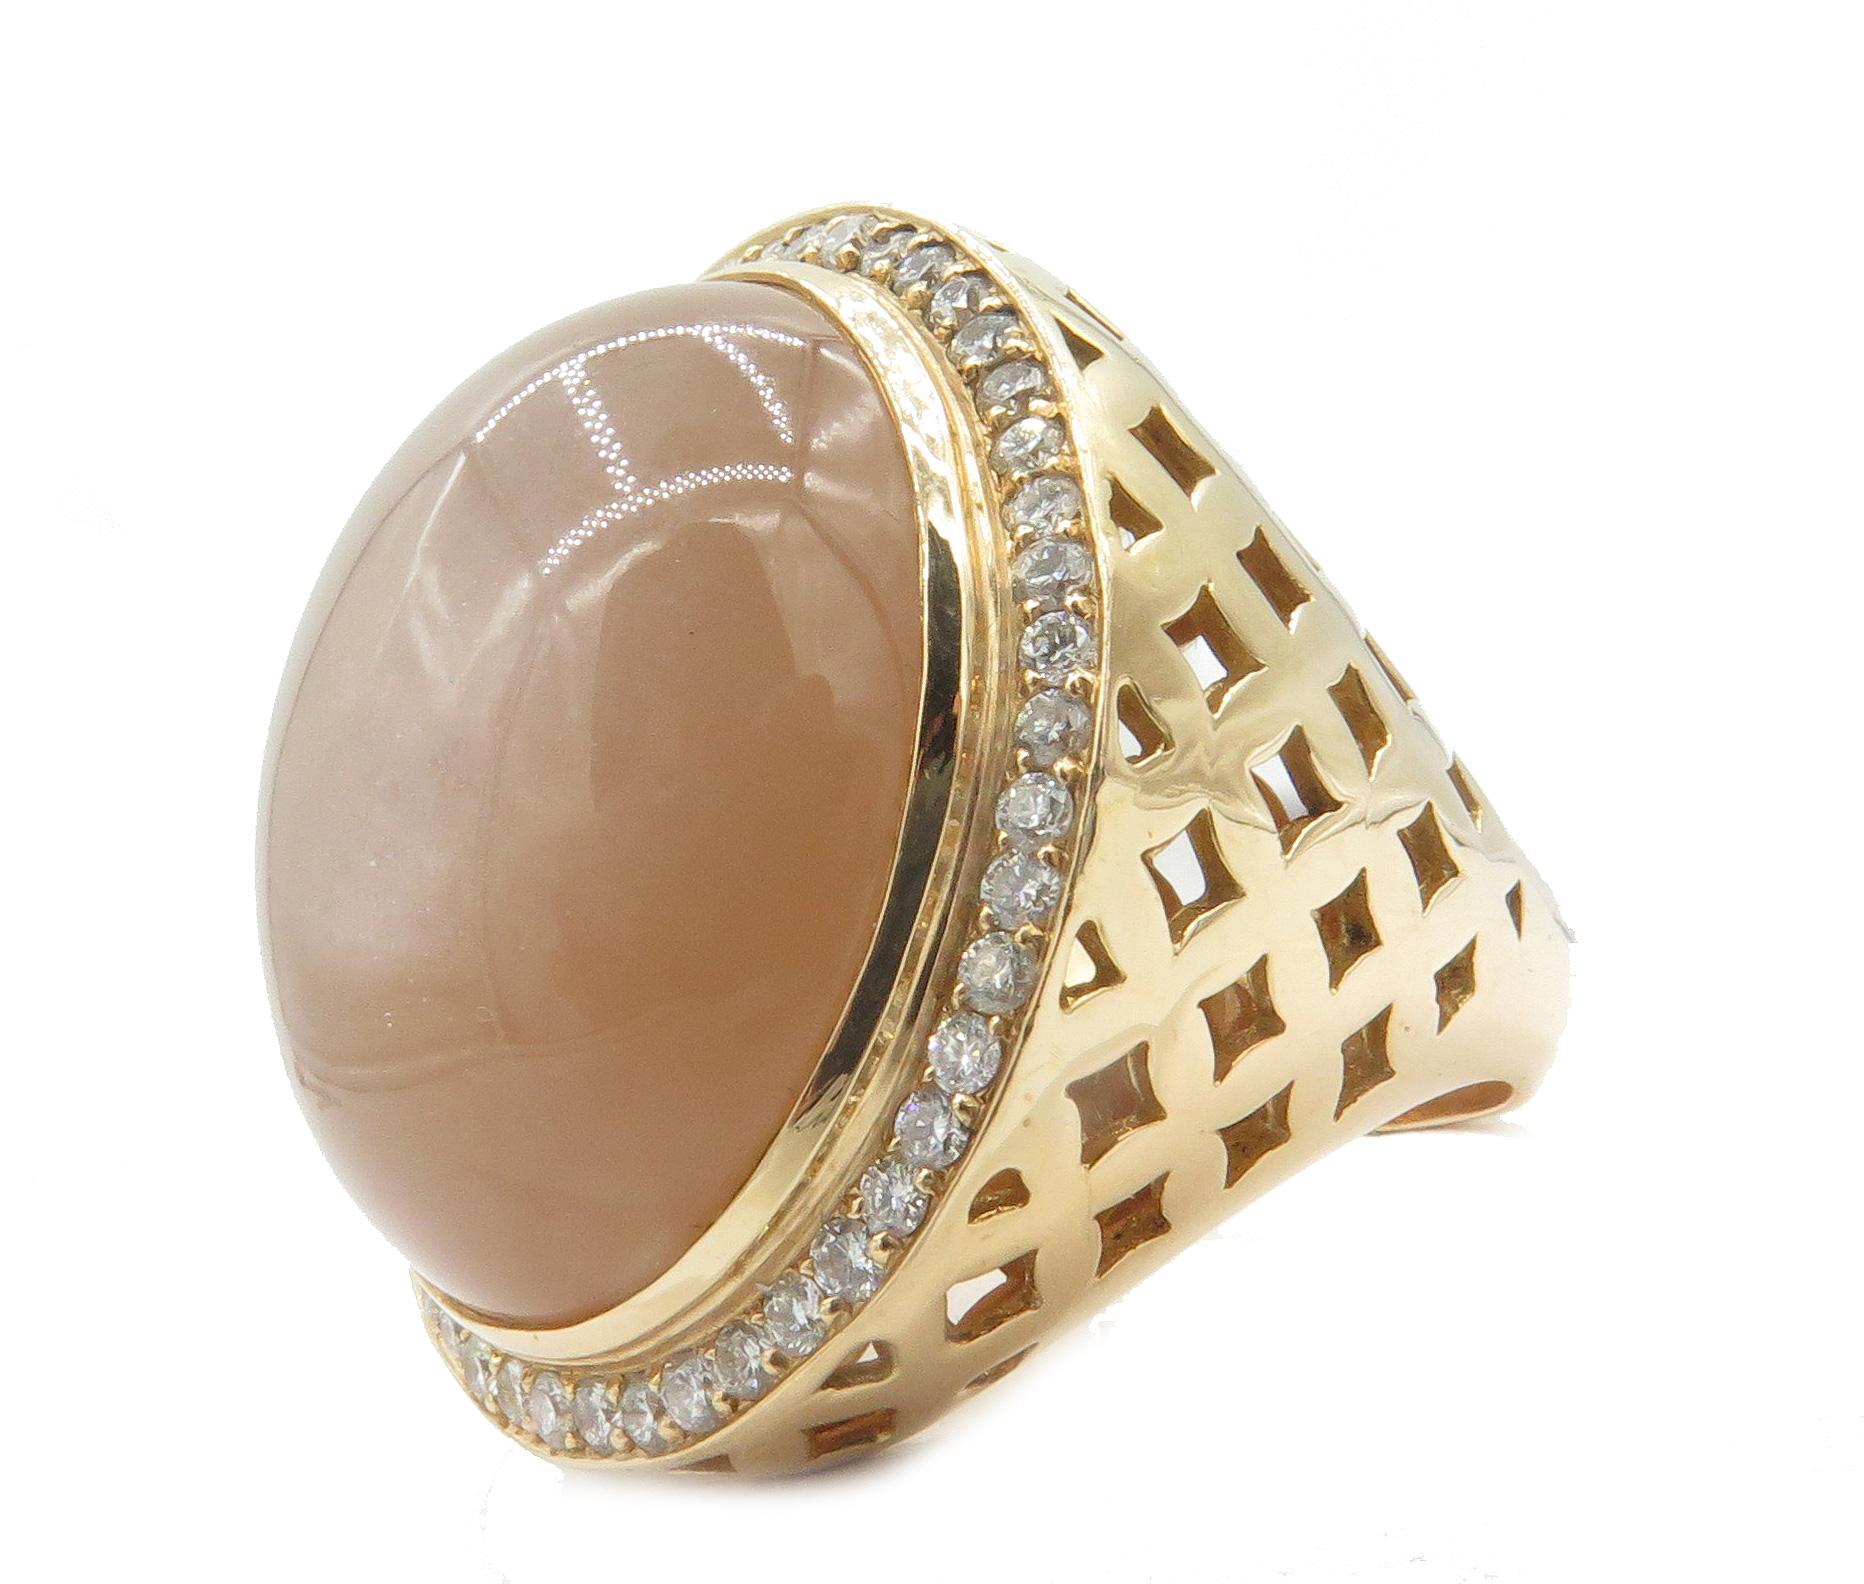 A beautifully, crafted and designed 18k yellow gold dome ring. With a big beautiful cabochon moonstone in the center beautifully set on 18k yellow gold surround the Moonstone is a beautiful array of round beautiful diamonds. This is US ring size 7.